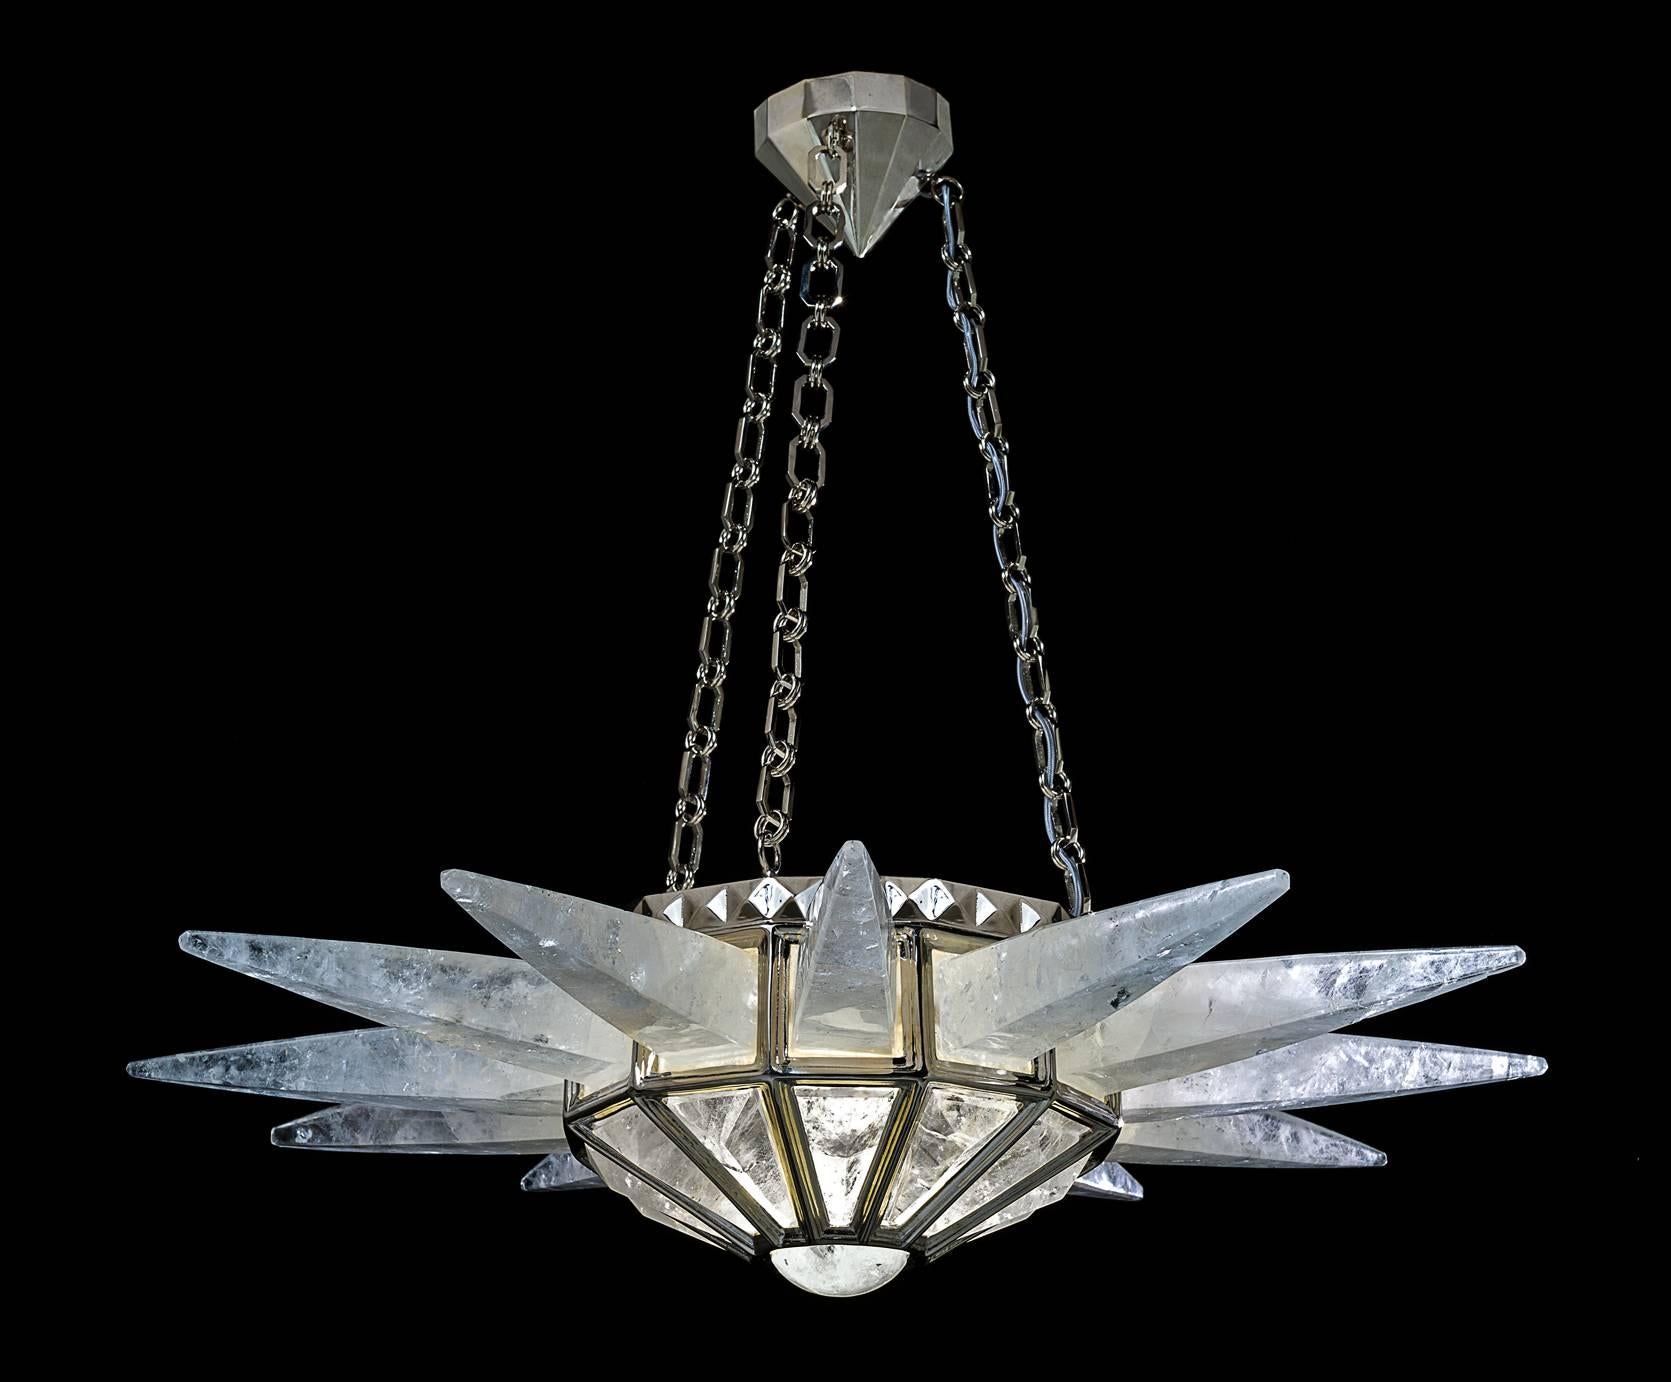 Rock crystal  quartz sunshine light, silver edition.
Original model design by Alexandre Vossion and made since 2014.
The fixture, chains and canopy of this rock crystal chandelier are handmade in bronze in PARIS.
Workers who made this model worked